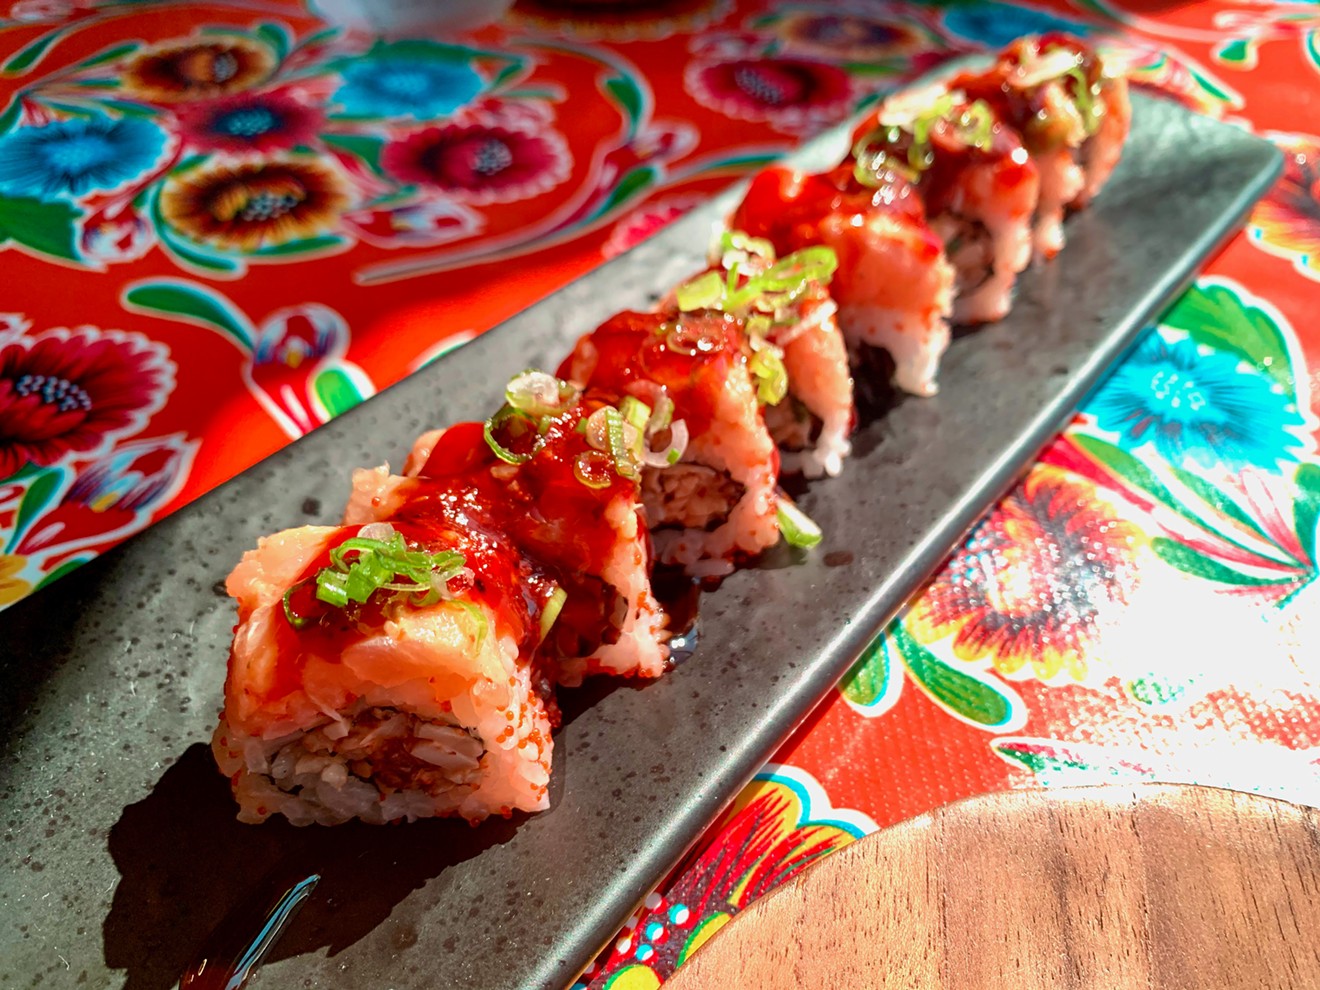 The sushi roll at Resistencia's Sunday brunch